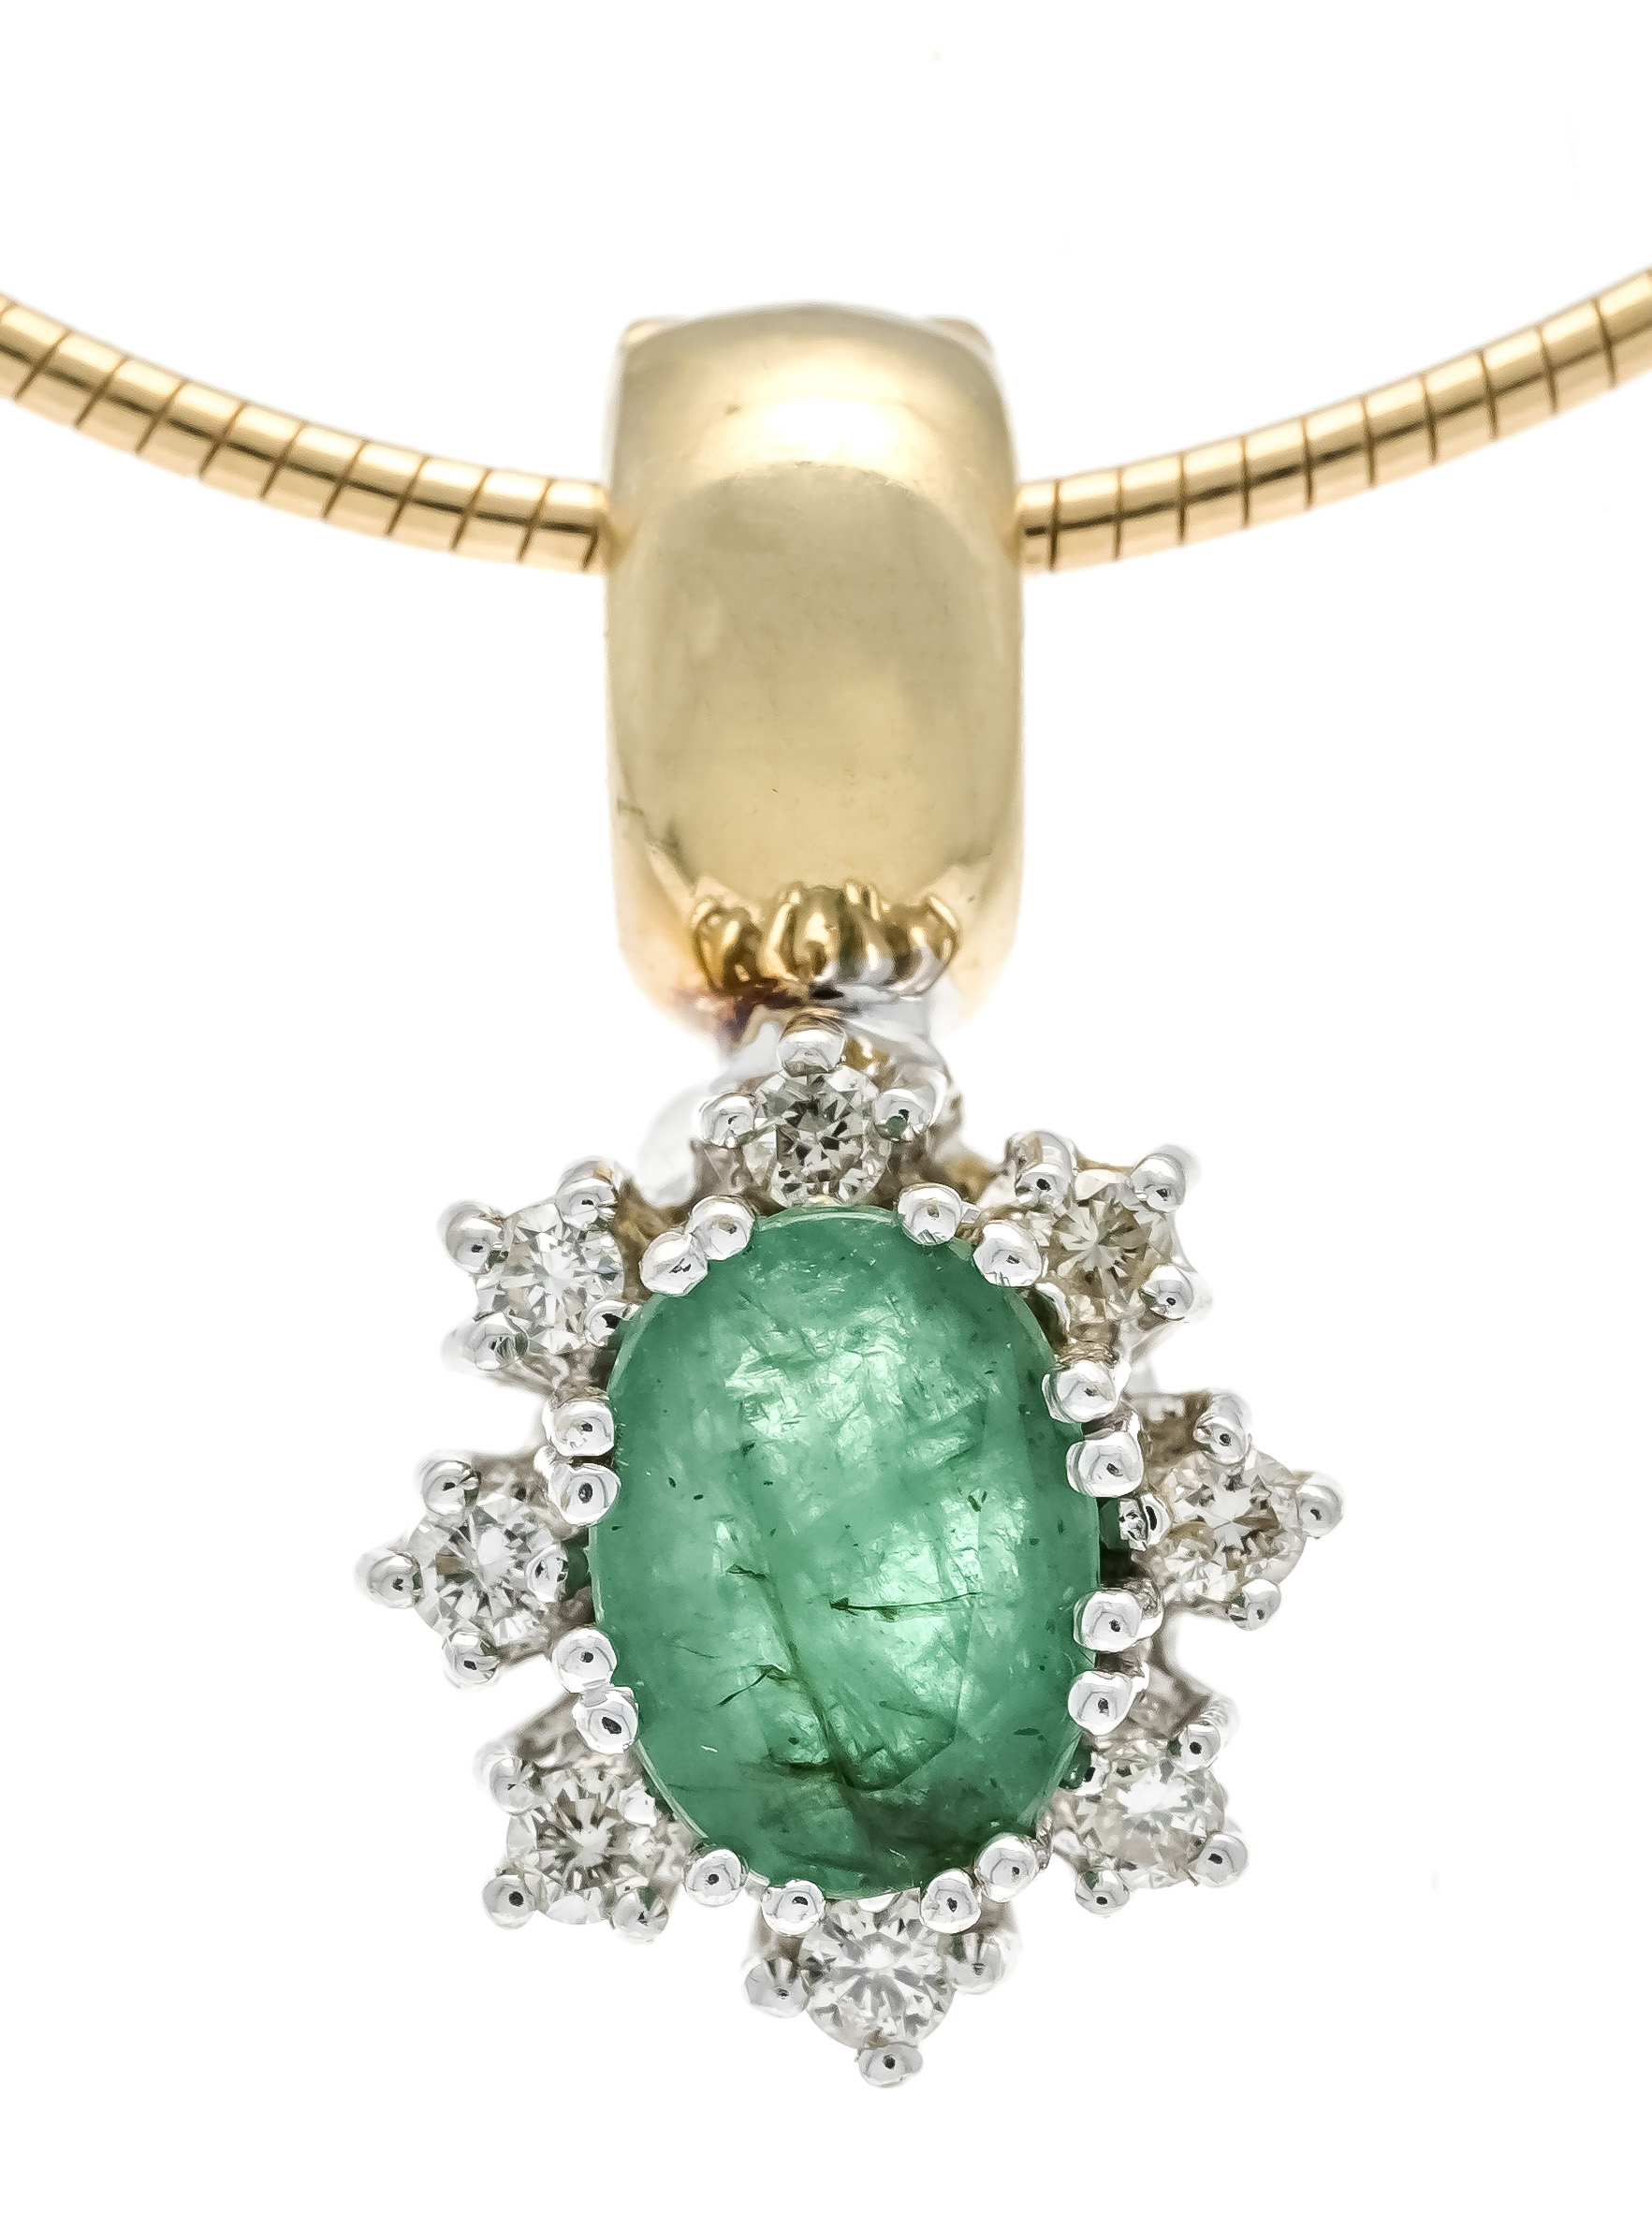 Emerald diamond clip pendant GG/WG 585/000 with an oval faceted emerald 6.7 x 5.4 mm green, opaque